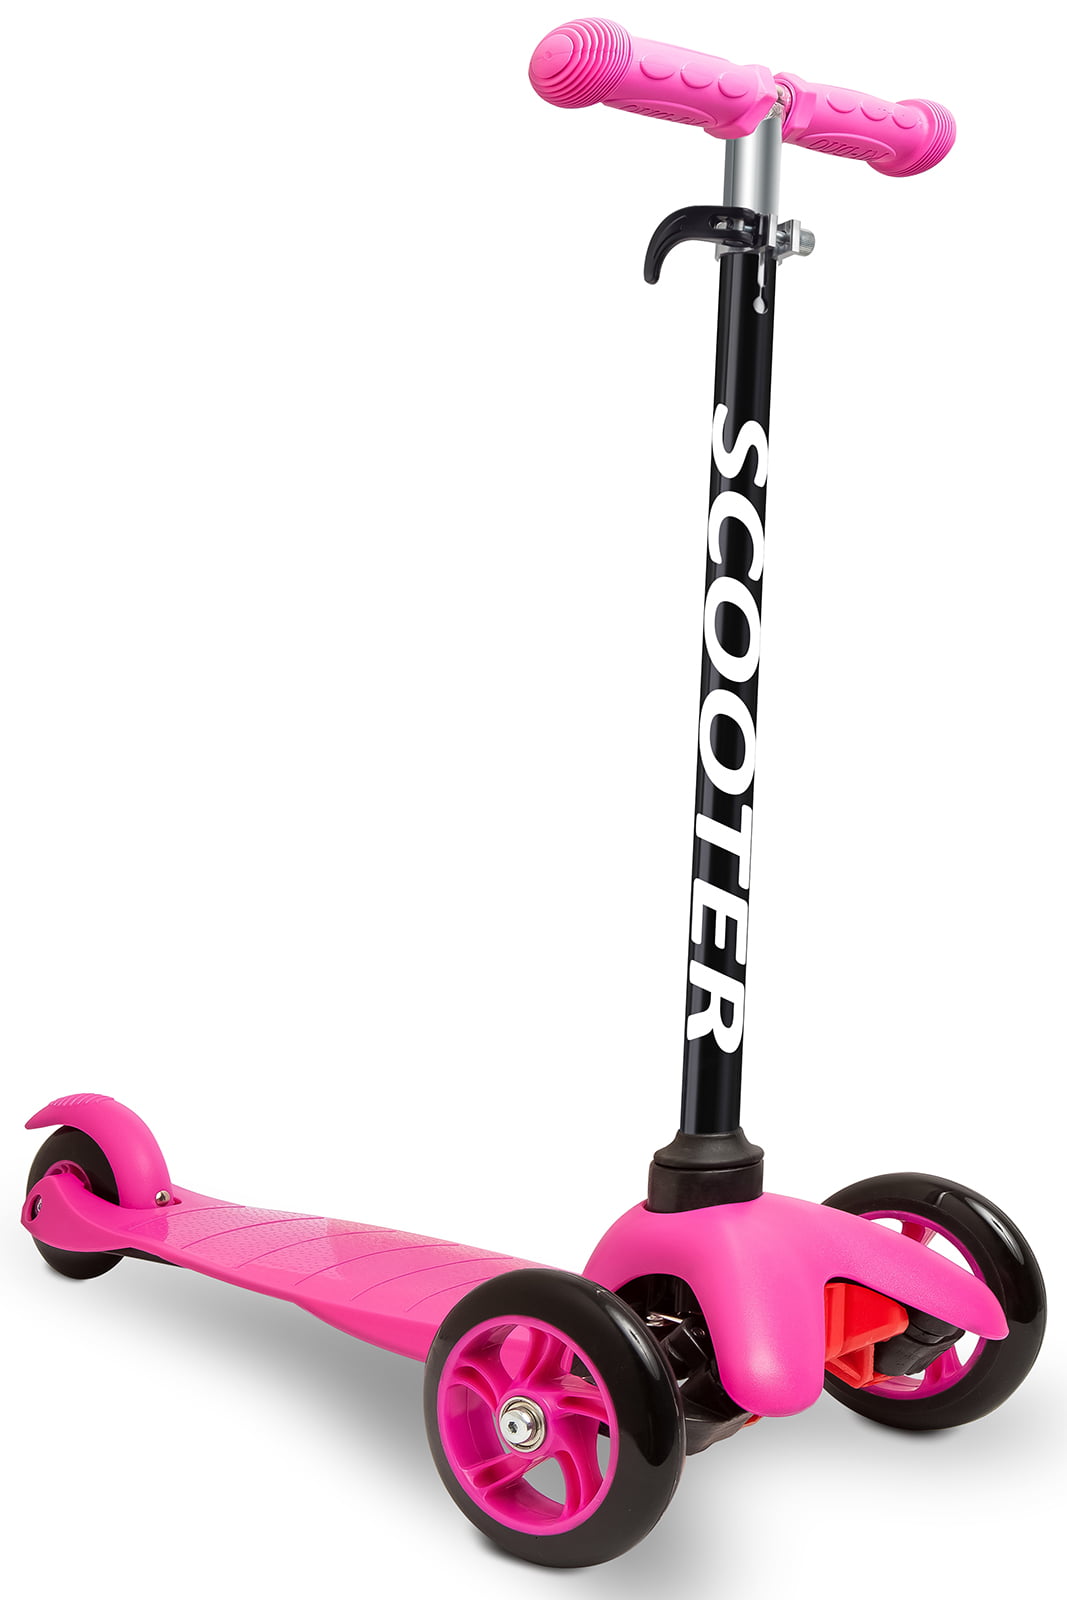 Scooter Forest Spirit Pink Fits Most Childrens 2 Wheeled and 3 Wheeled Scooters Scootaheadz: Kids Scooter Accessories Pink and Purple T-Bar Handle Scooter Fawn Head for Kids Girls